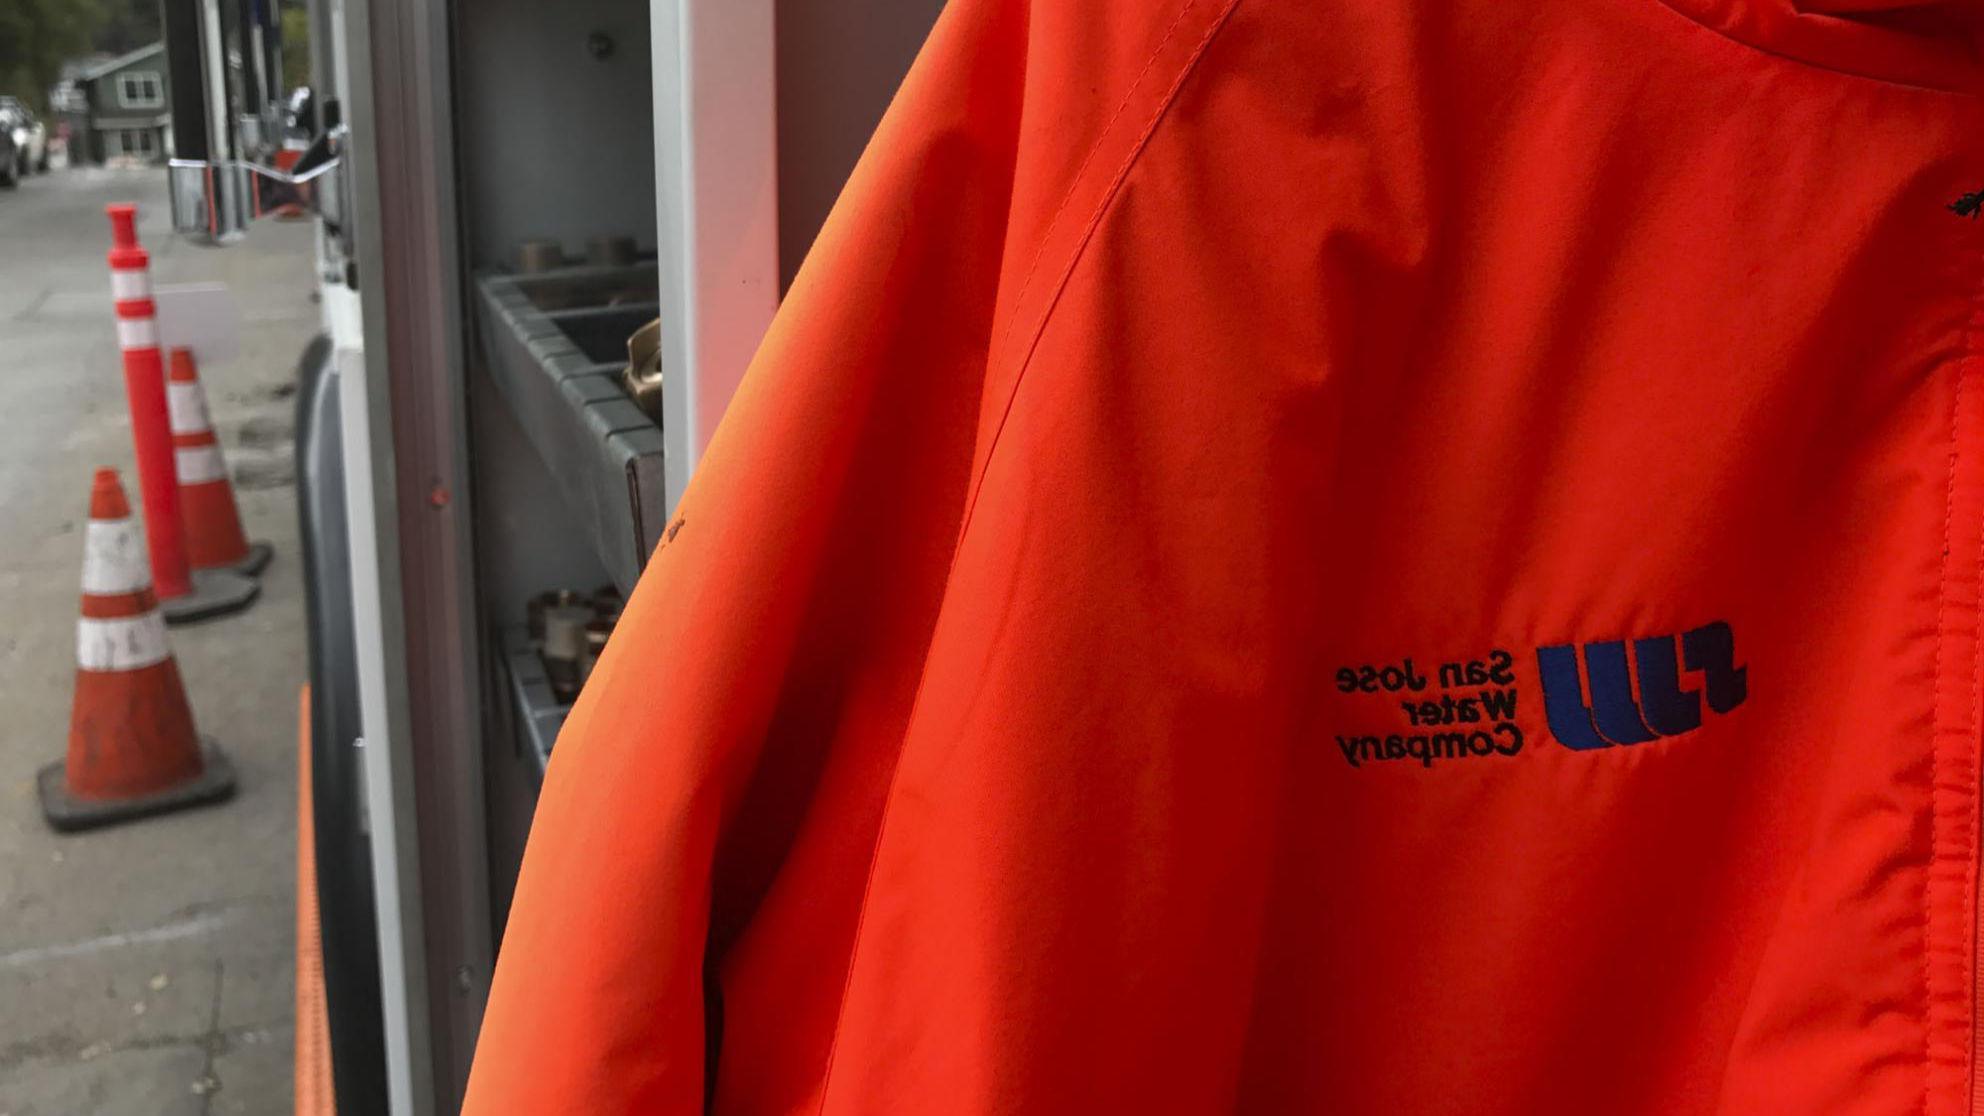 Orange jacket with SJW logo in foreground and pylons in the background